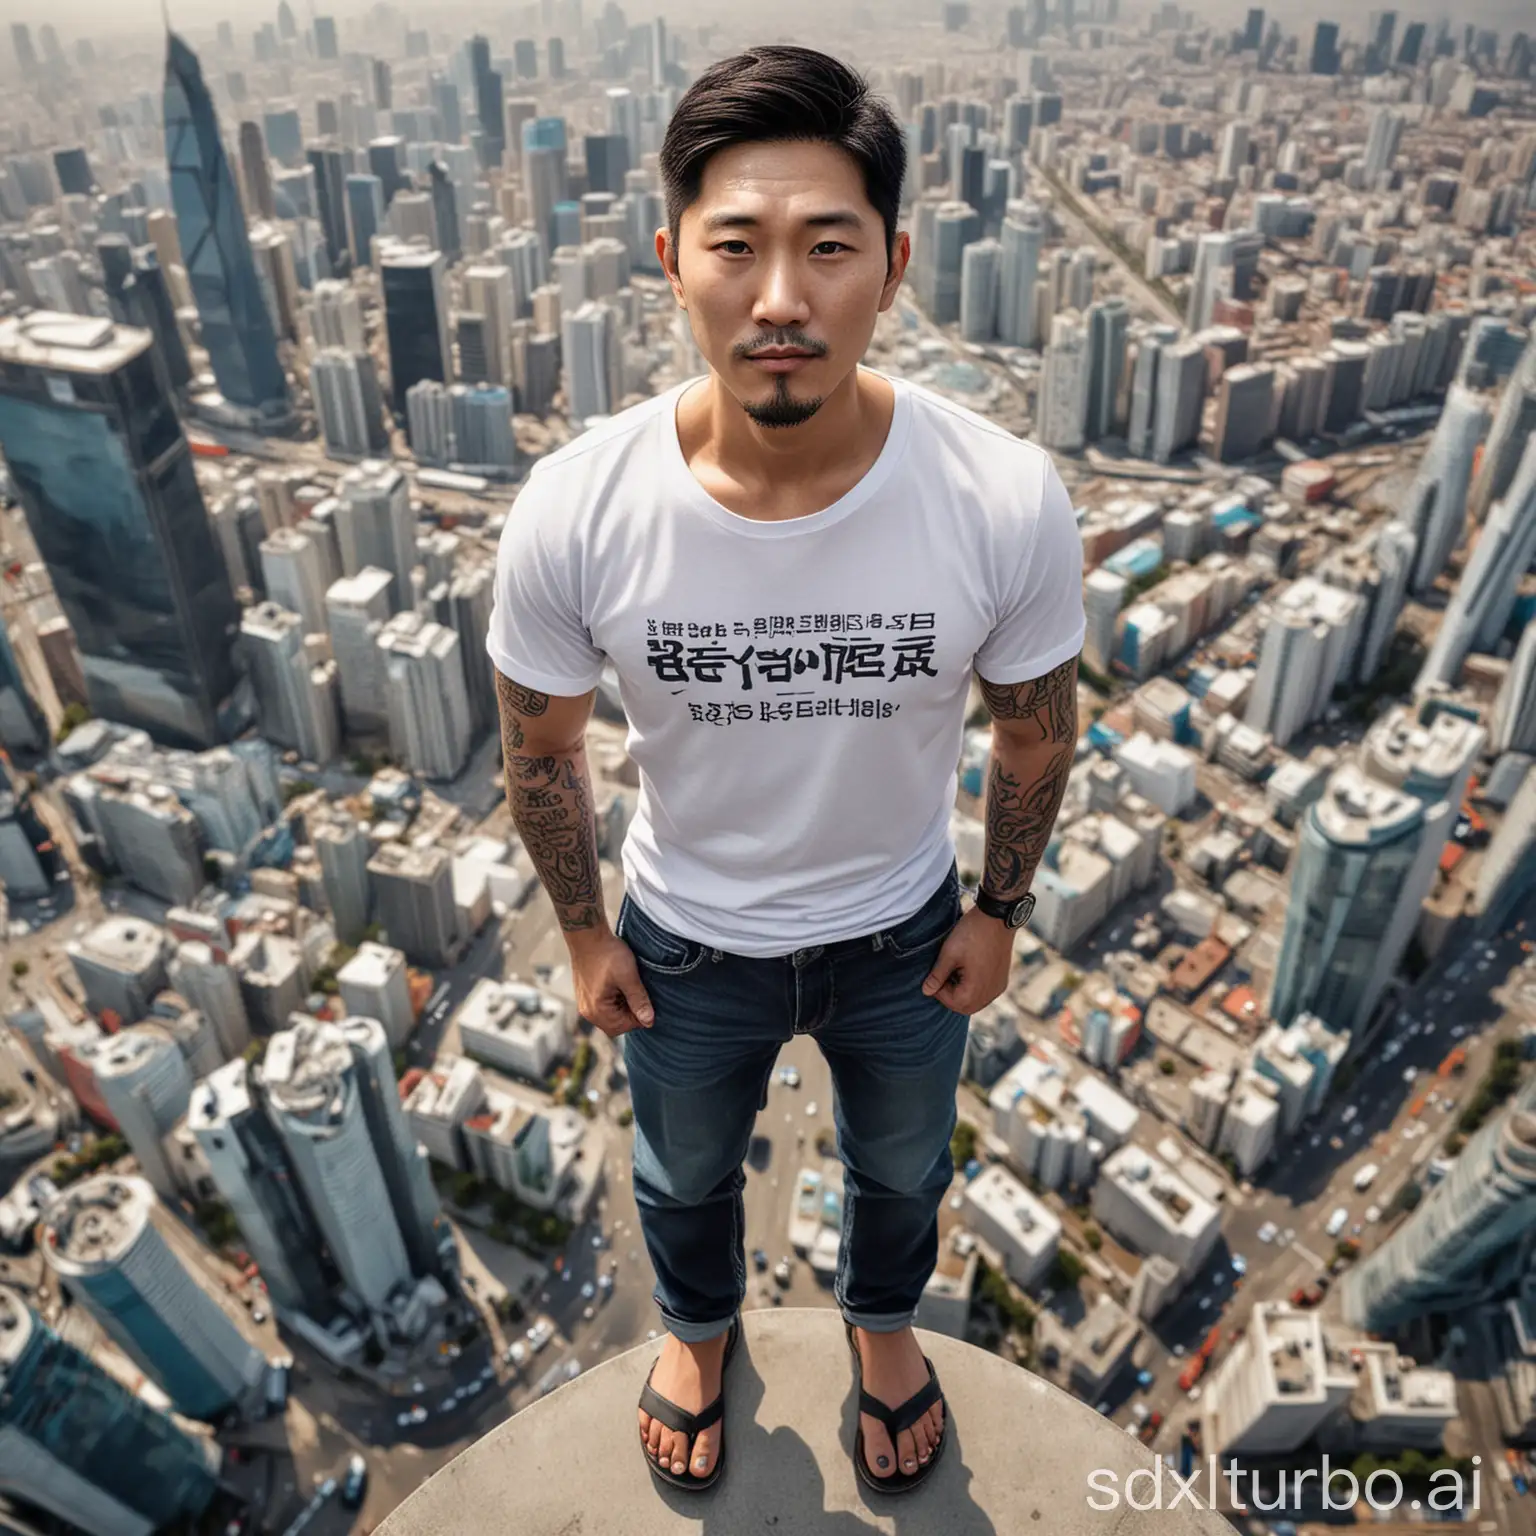 Created a hyperrealistic 4D caricature of a 35 year old Korean man, clean oval face, fully tattooed arms to the neck, long hair, wearing a white t-shirt with the text 'DUGEM' short jeans, flip flops, standing on the top of the tallest building, hand holding a glass of black coffee. Beautiful city background, shot from above, fisheye lens